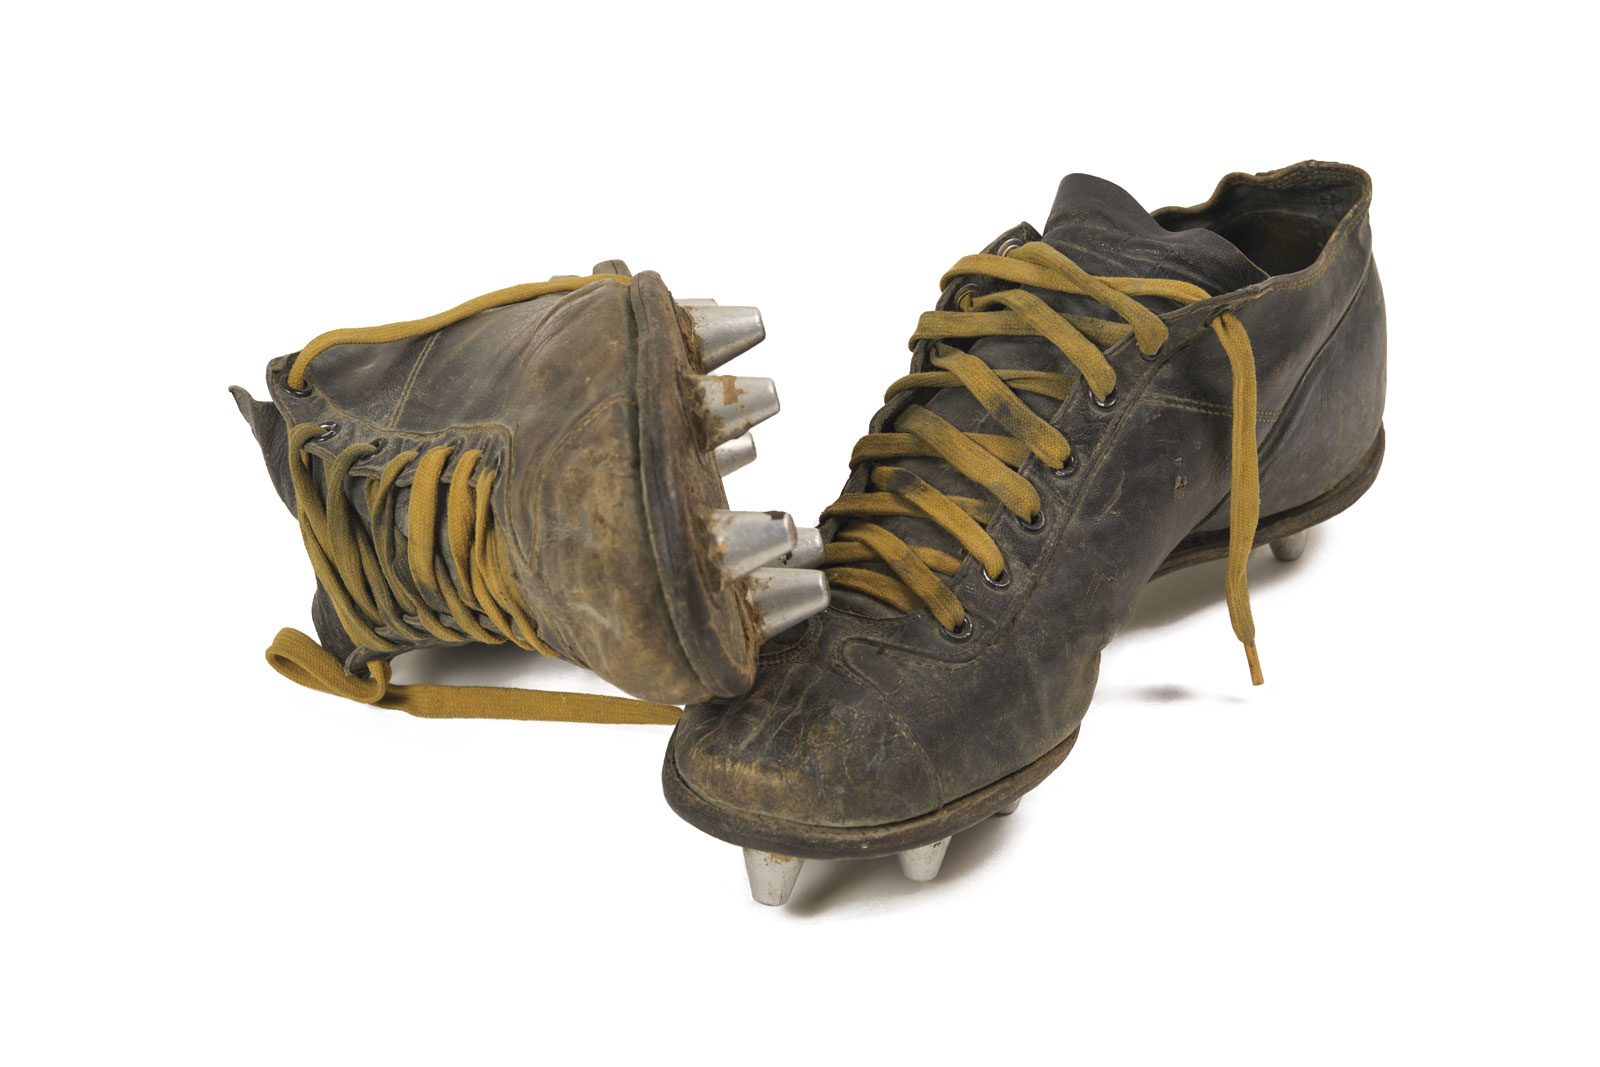 Dirty, cracked football cleats from the 1930s, with gold untied shoestrings, mud still on the bottom of the cleats